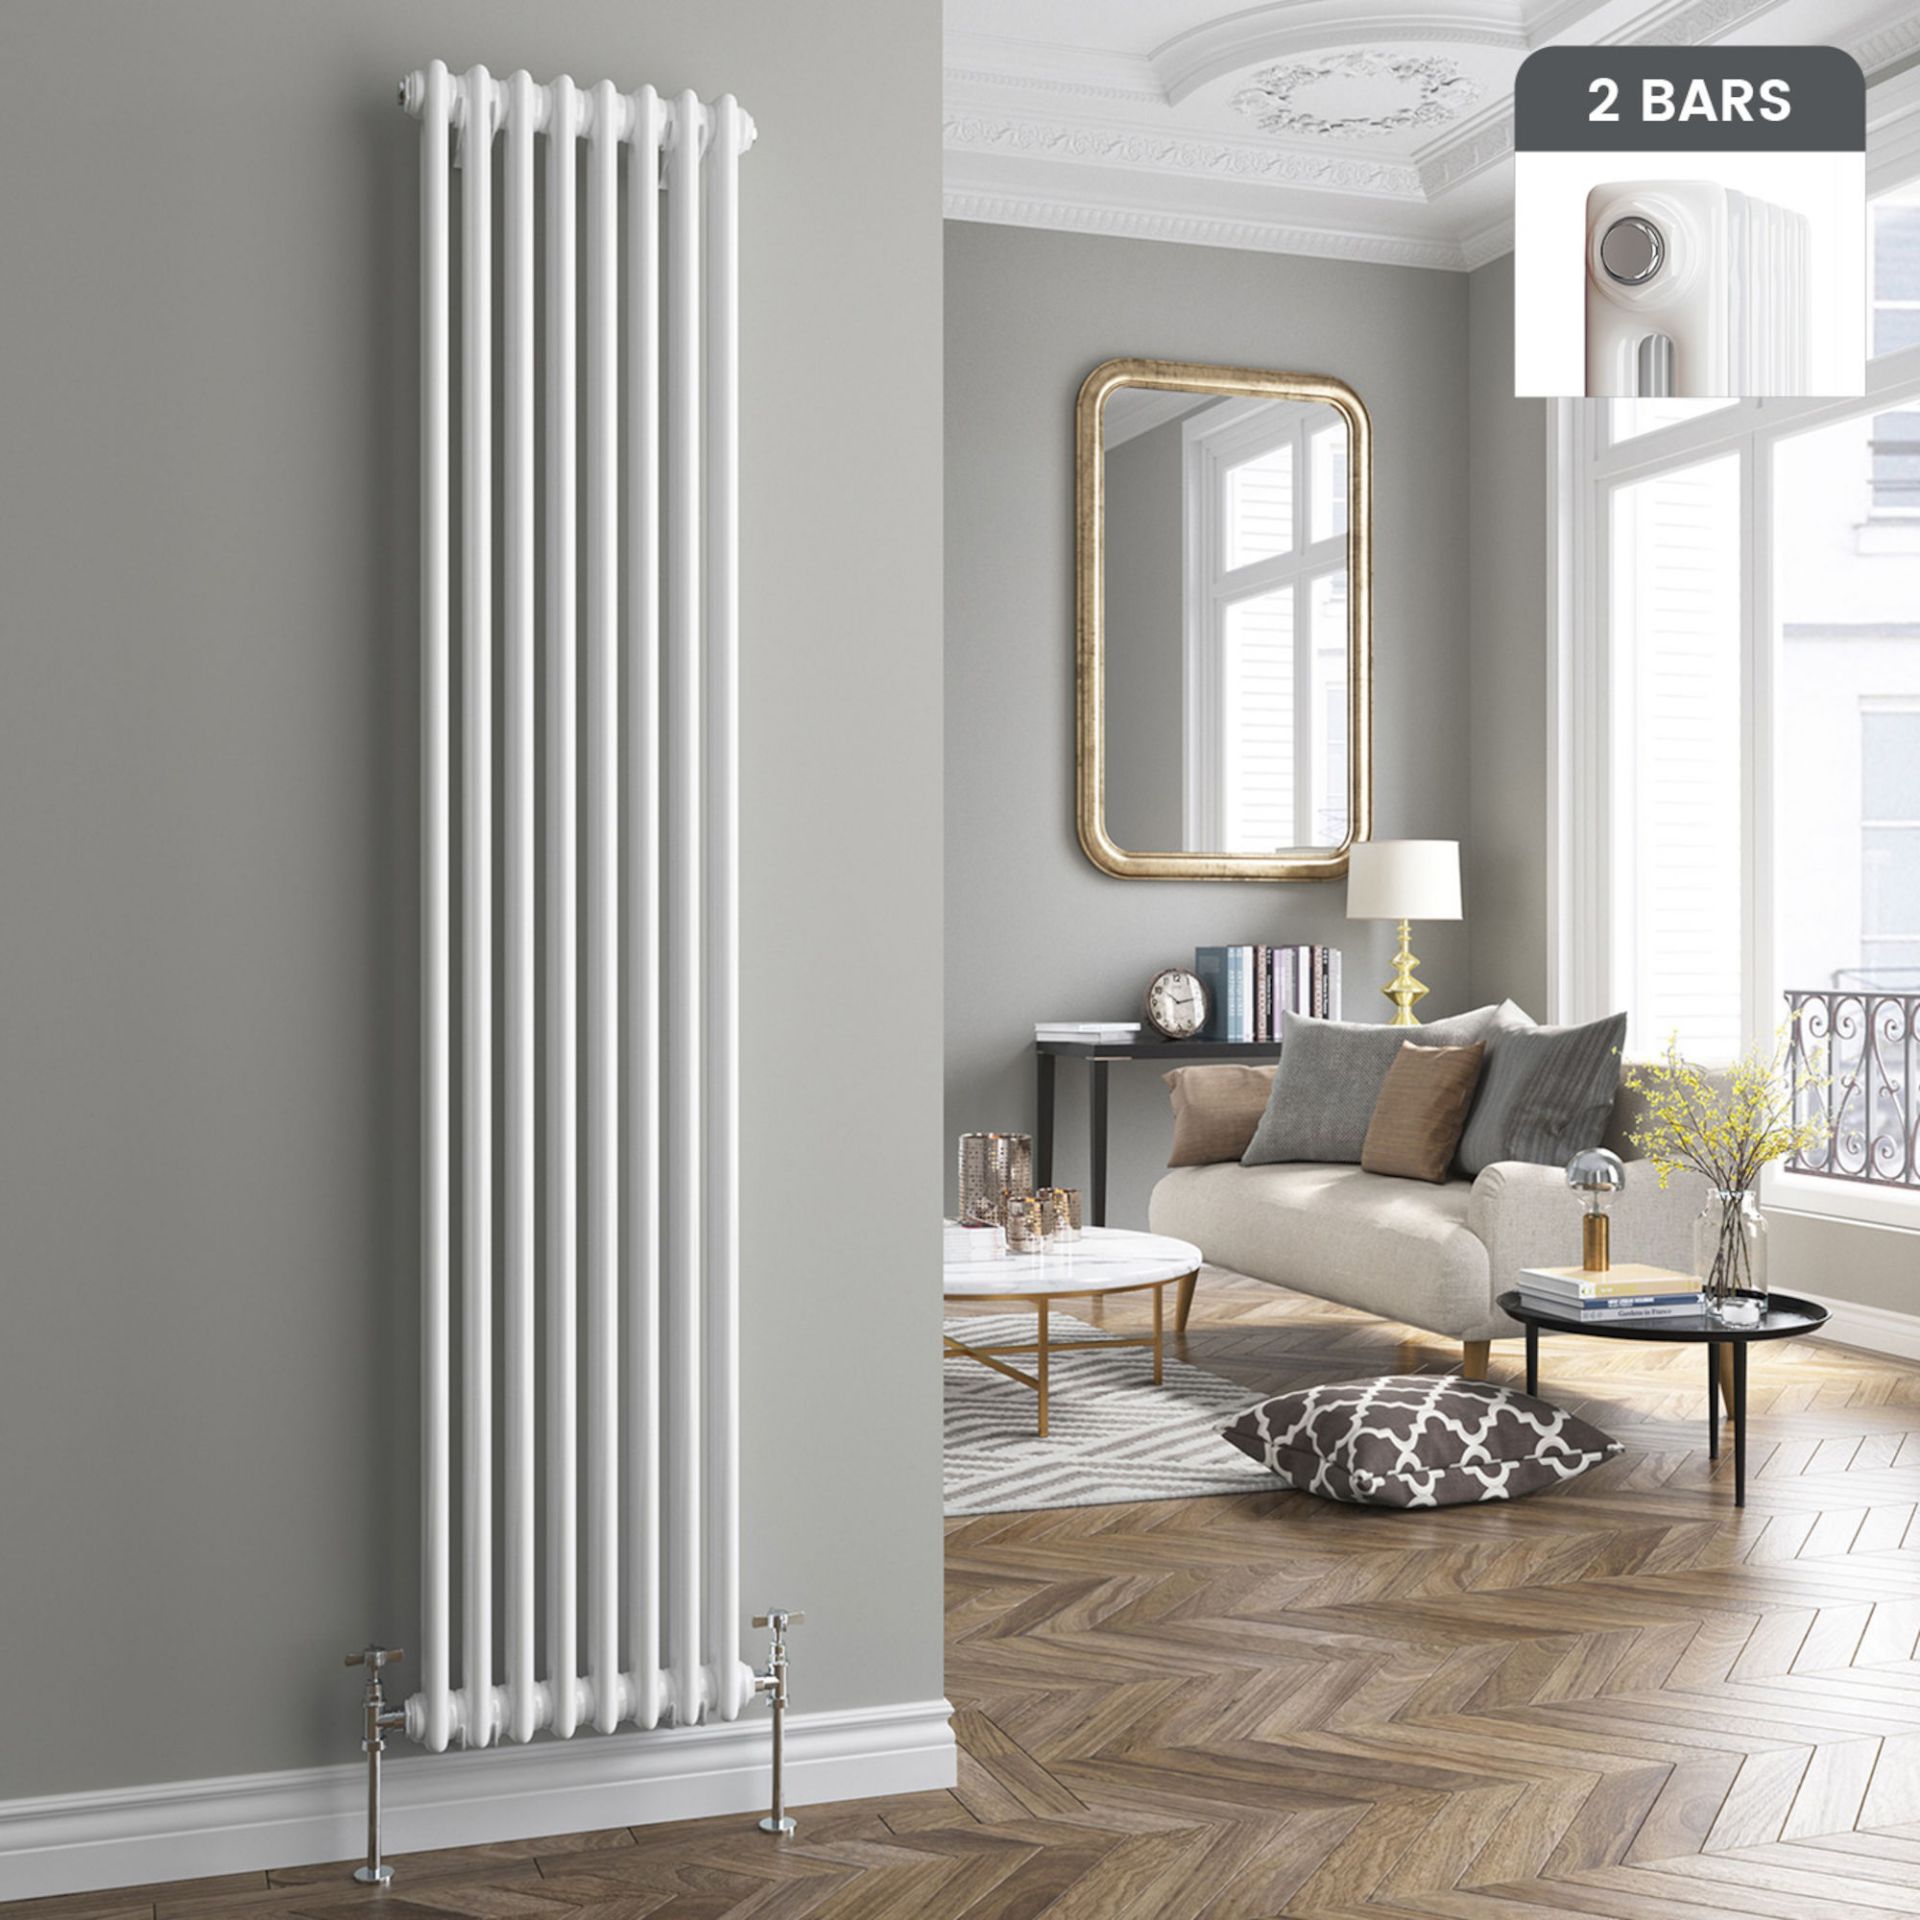 (OS285) 1800x380mm White Double Panel Vertical Colosseum Traditional Radiator. RRP £408.99. Made